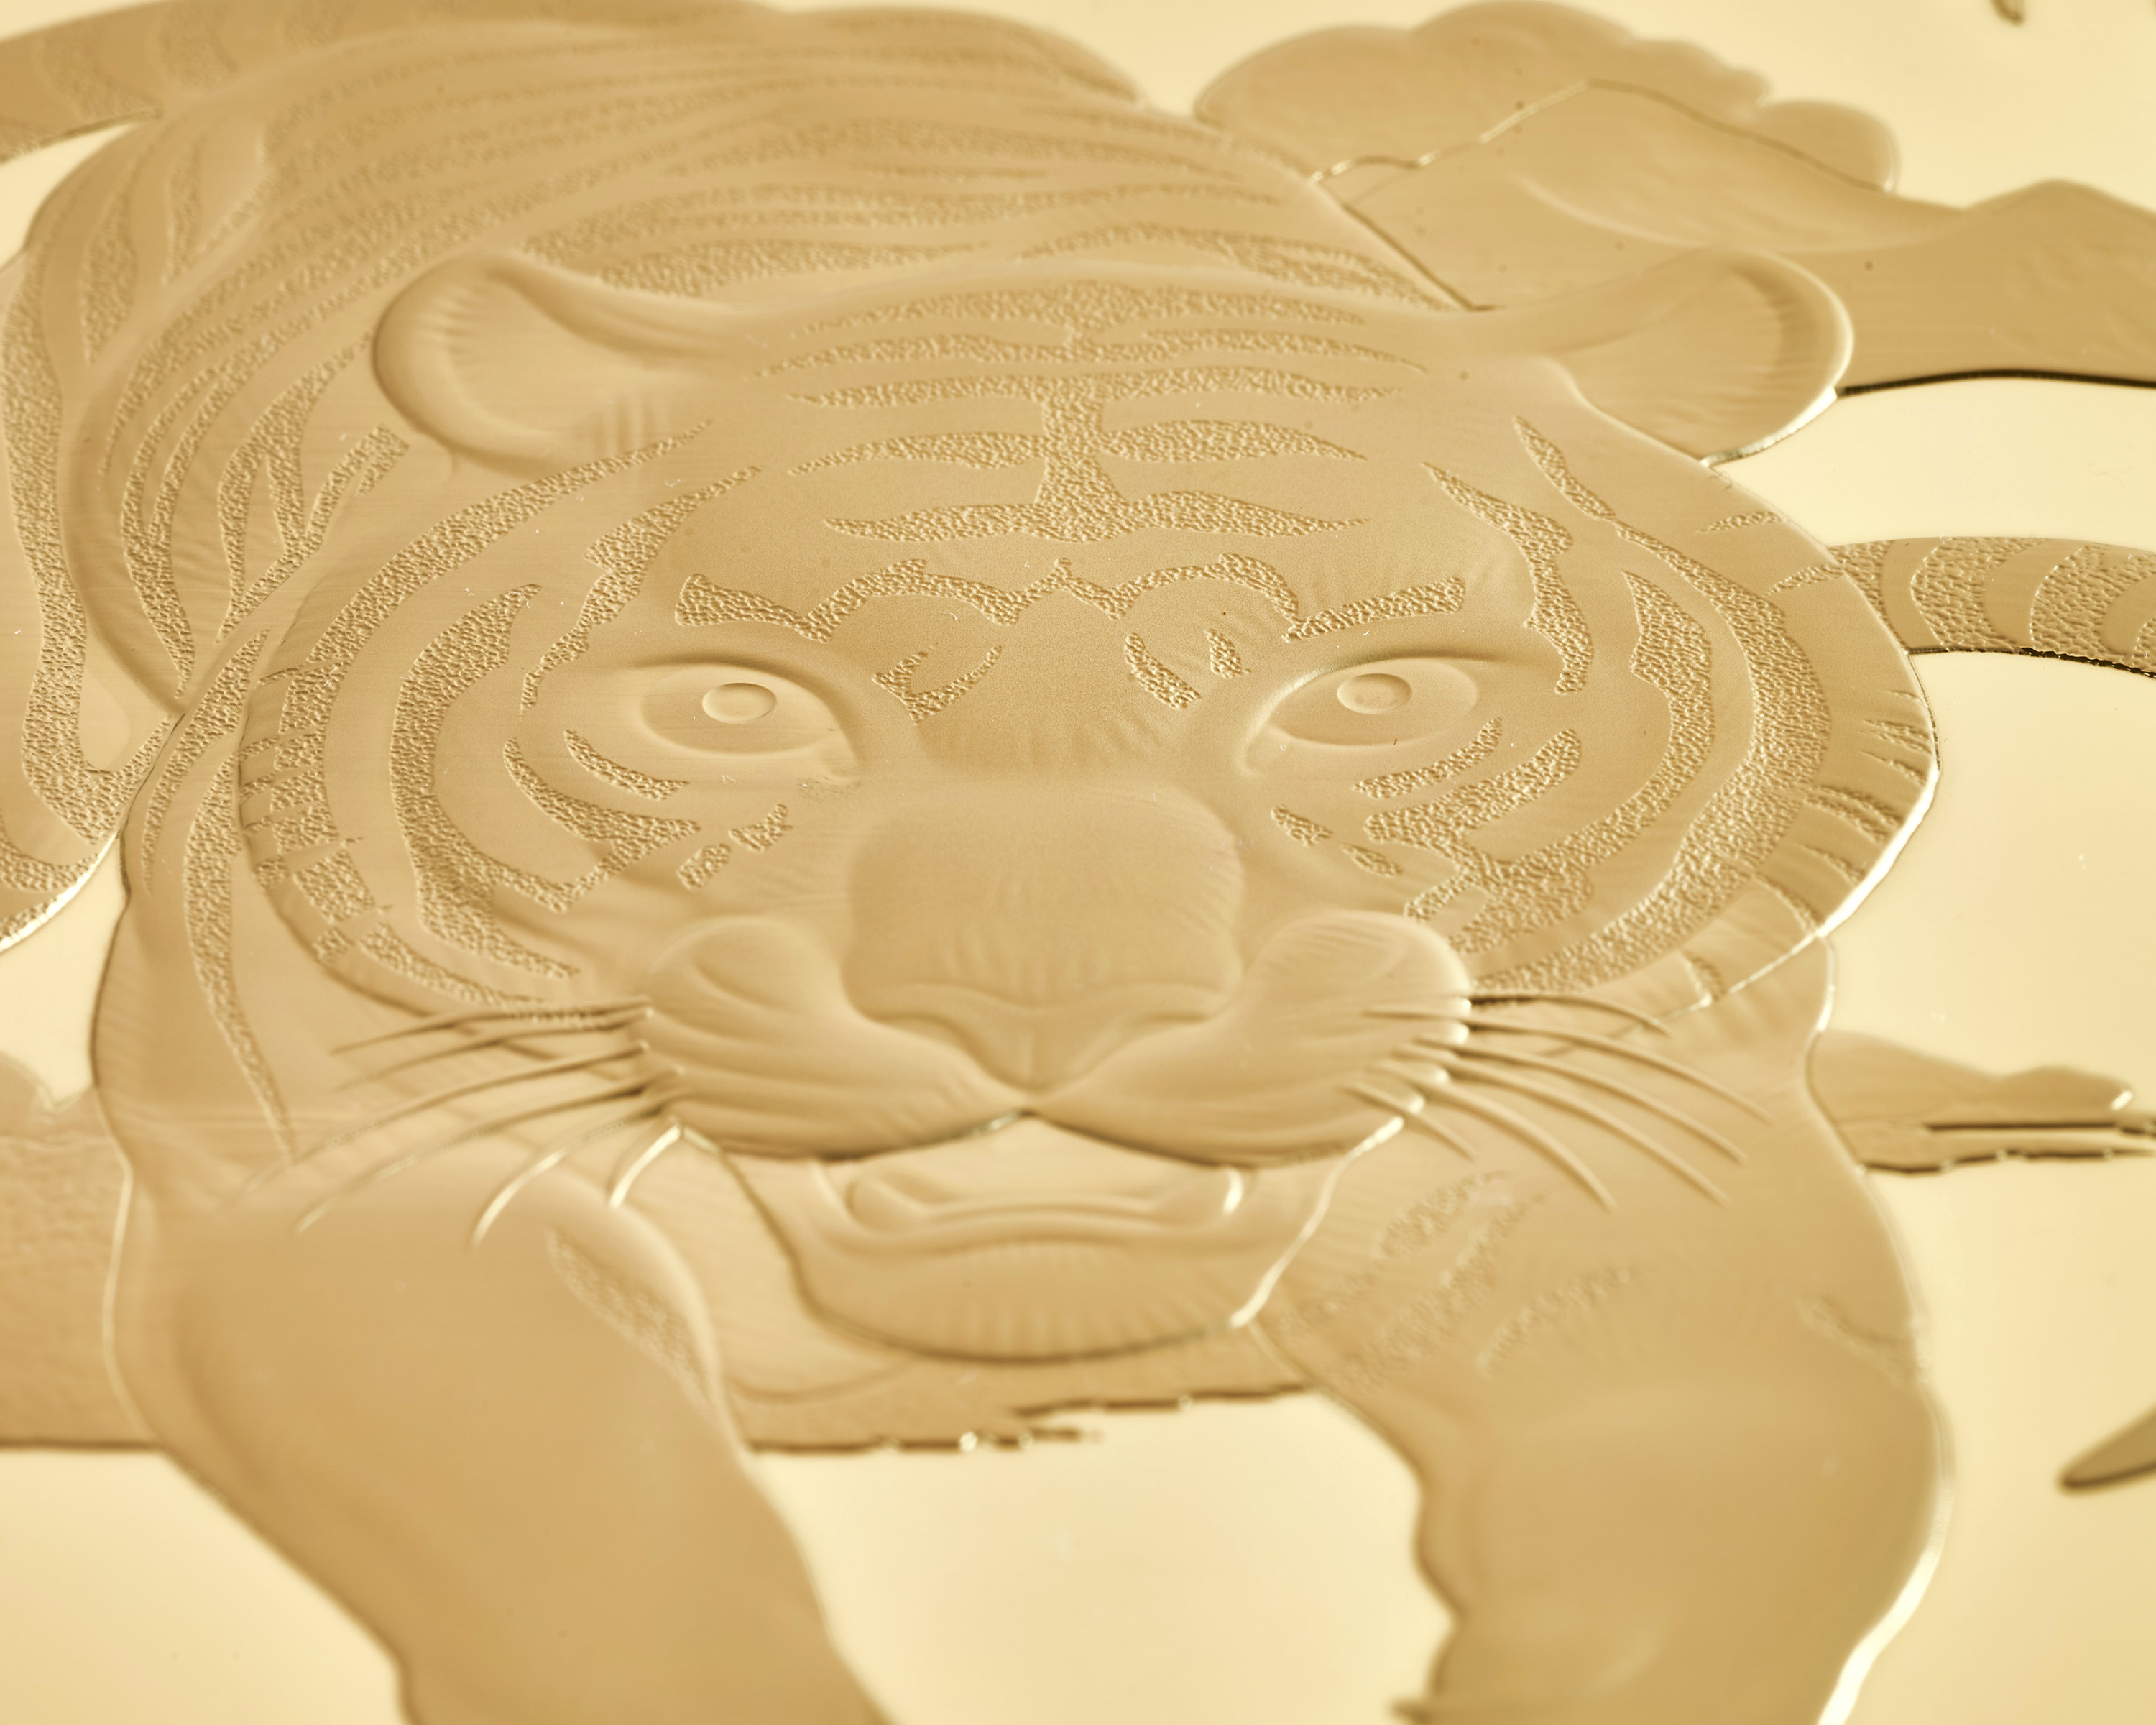 A close up of the Tiger coin